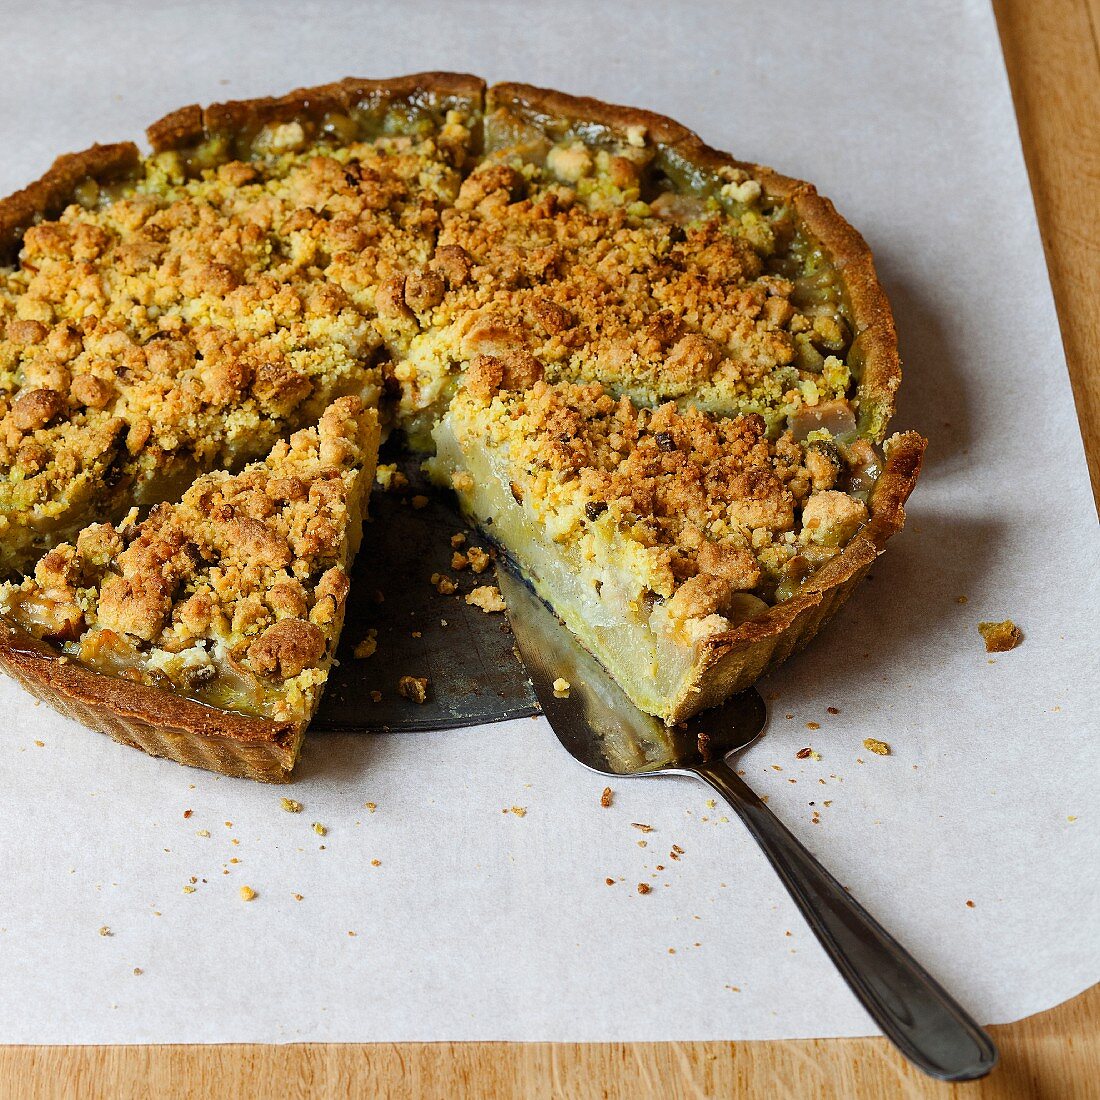 Pear and matcha pie with streusel